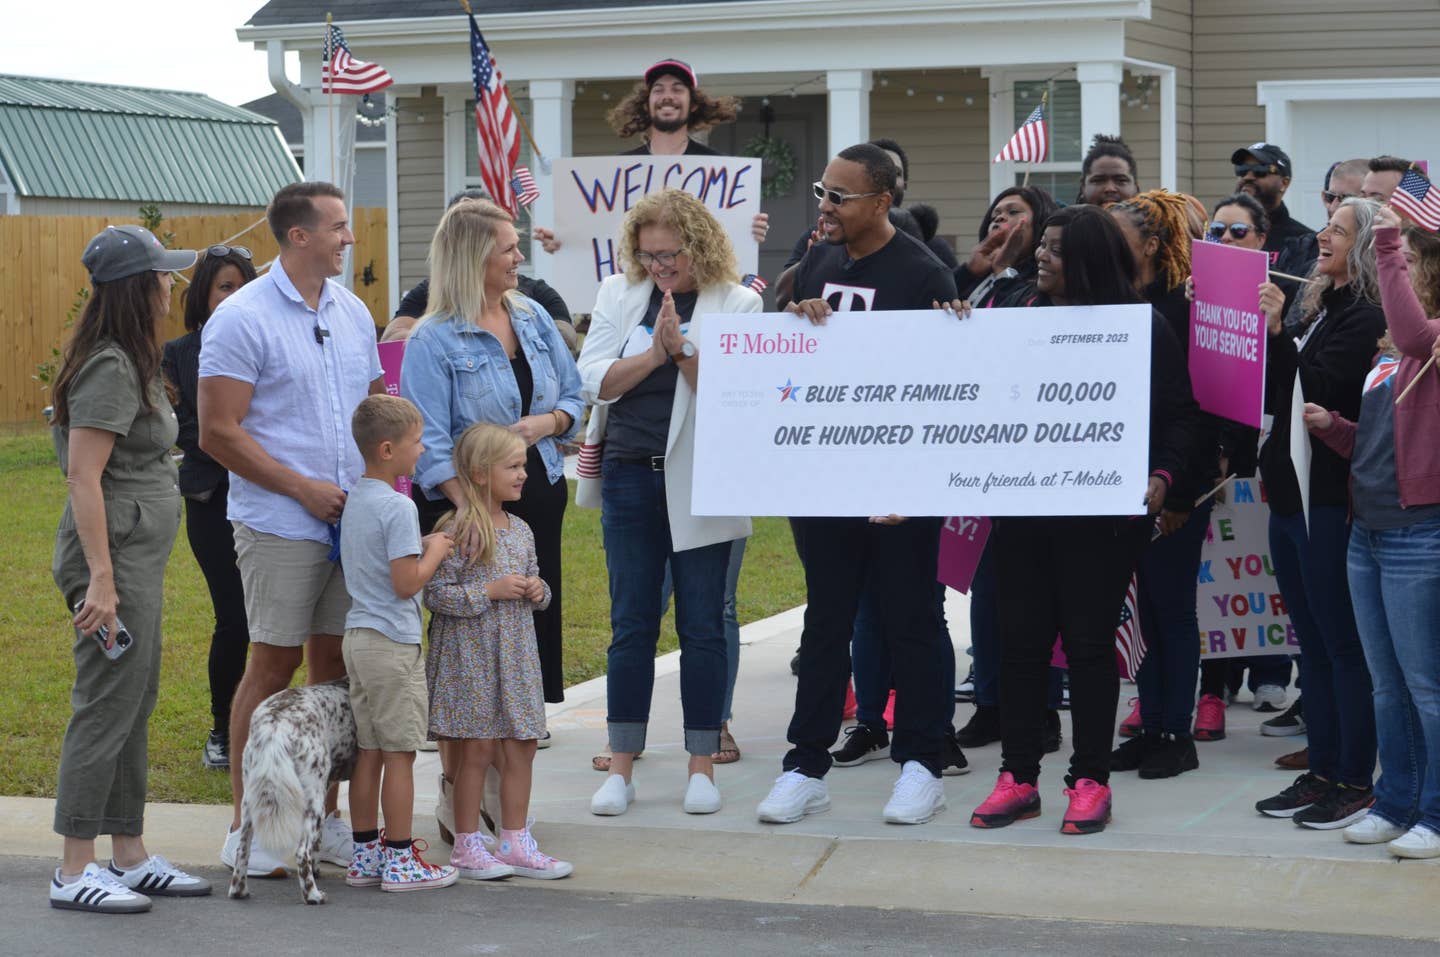 T-mobile presents a large check to Blue Star Families at a home makeover